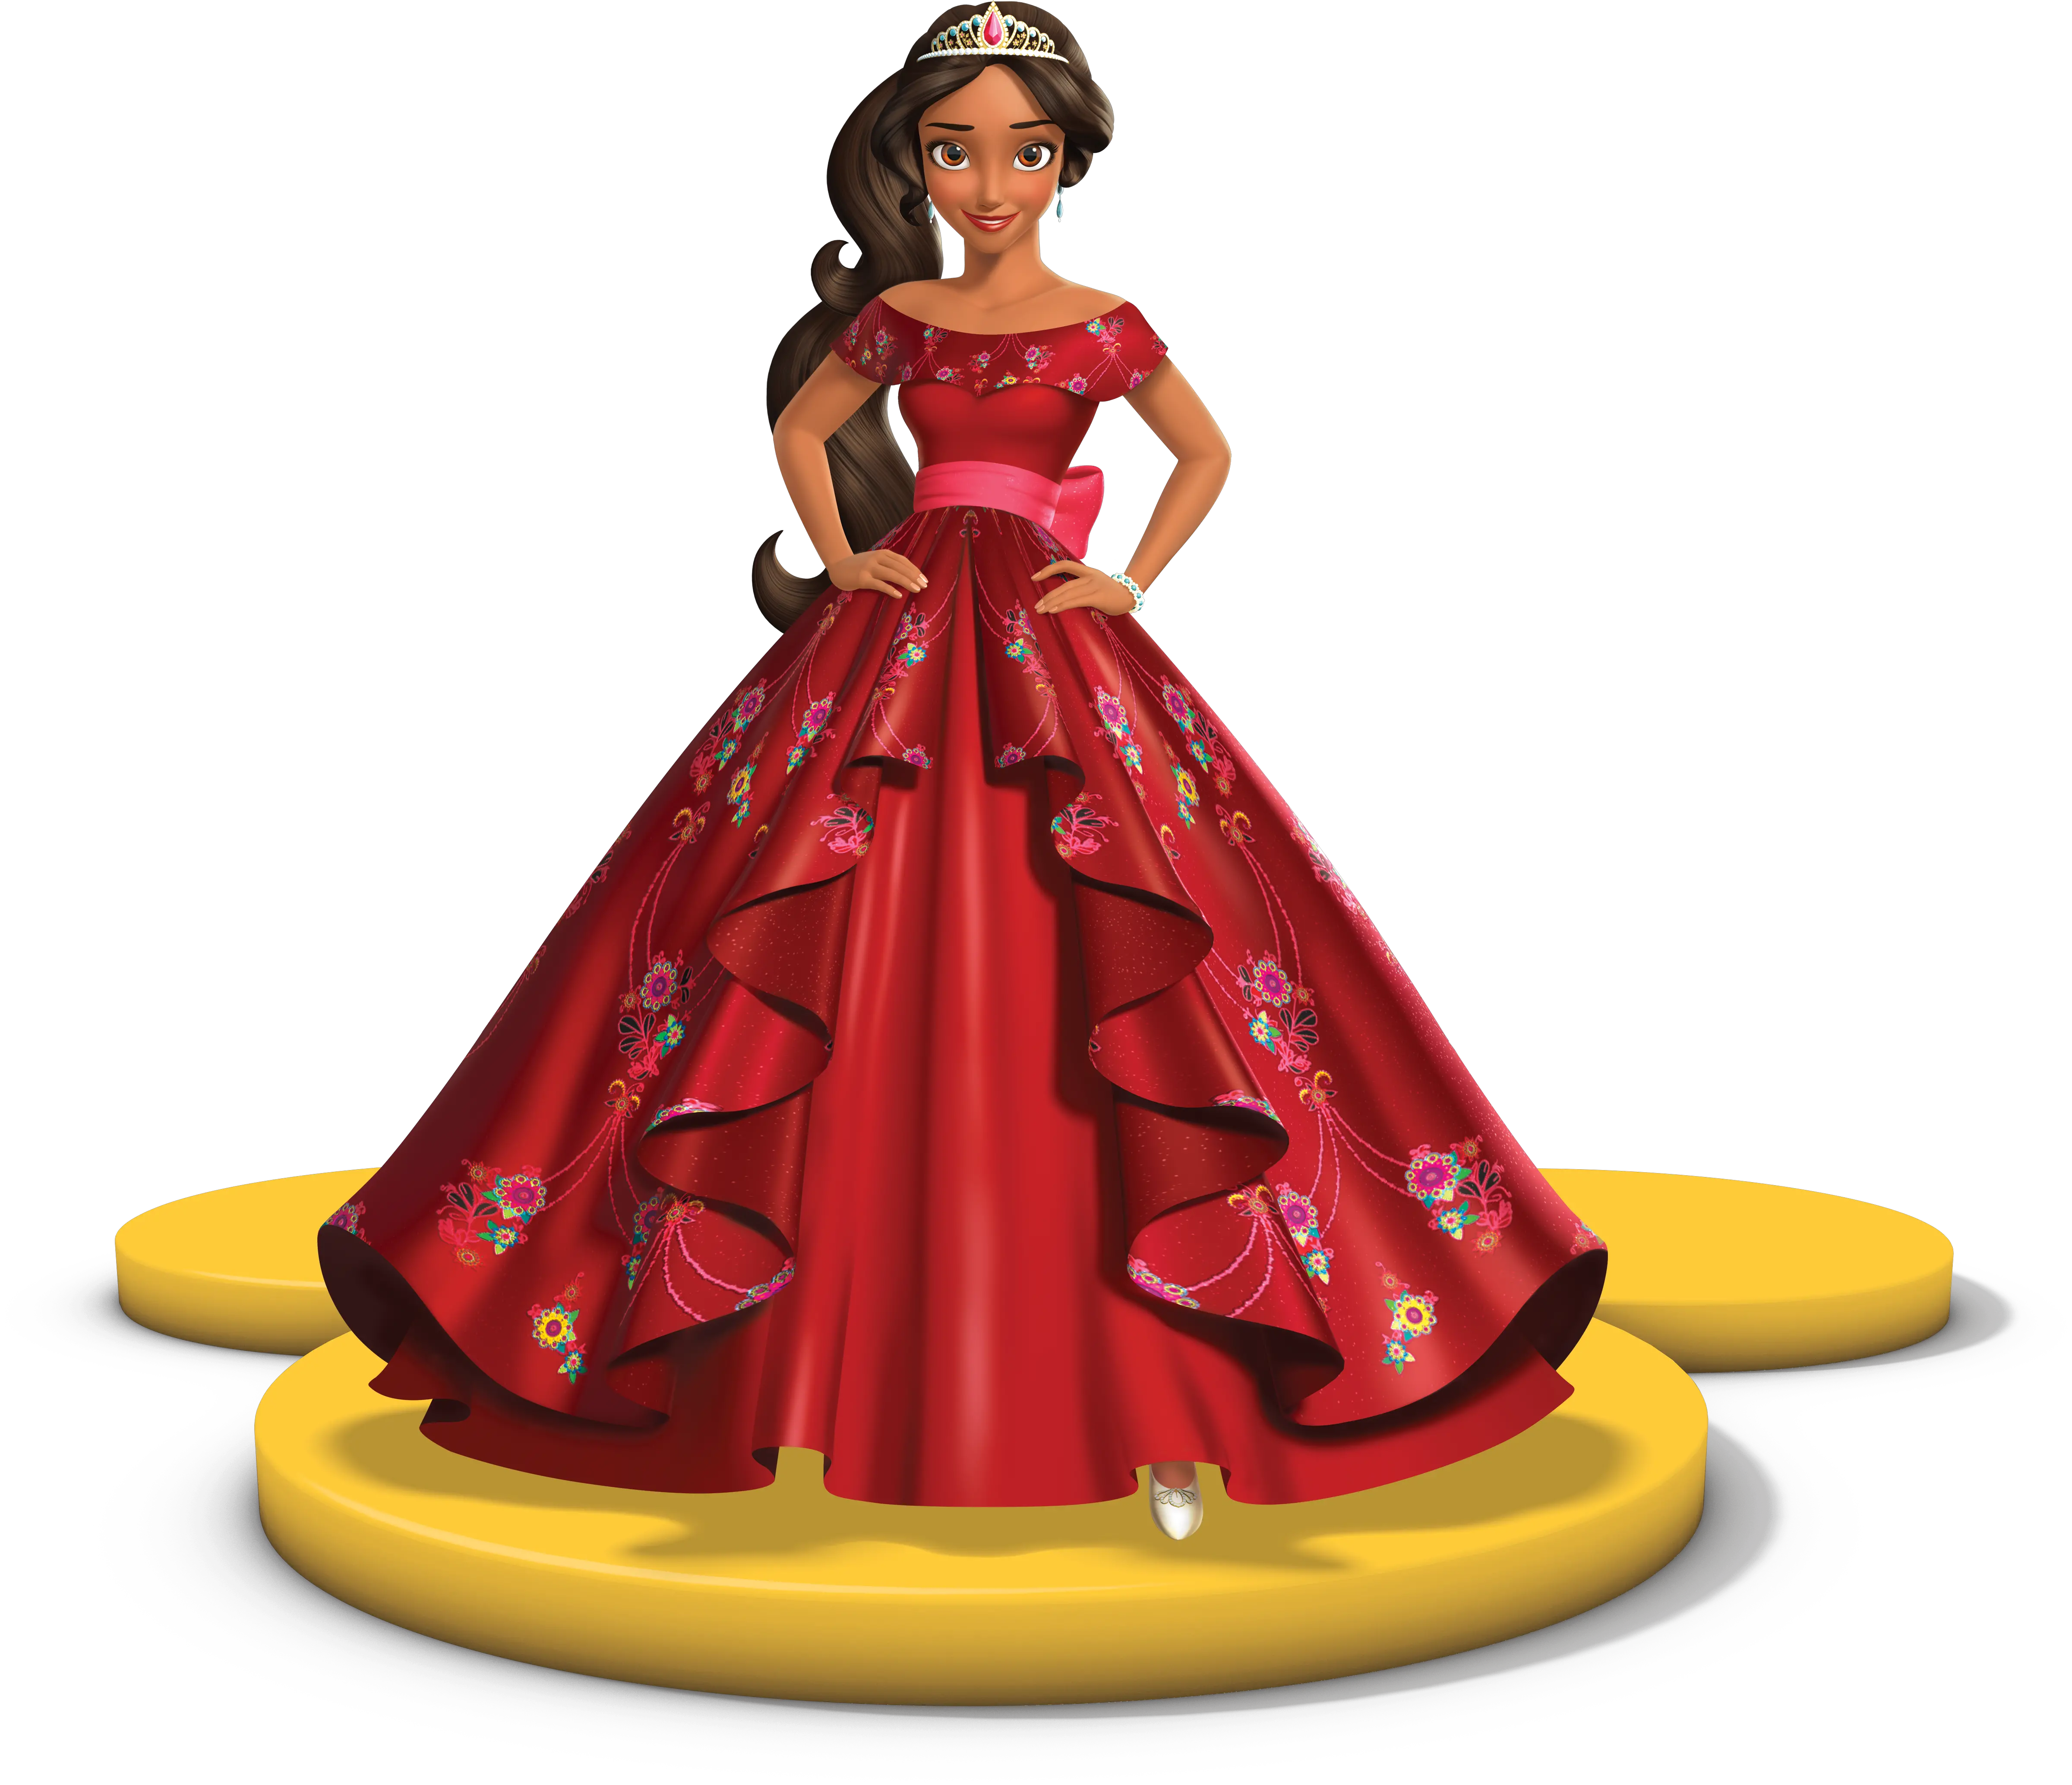 Download Minnie Mouse Bow Png Latina Disney Princess Minnie Mouse Bow Png